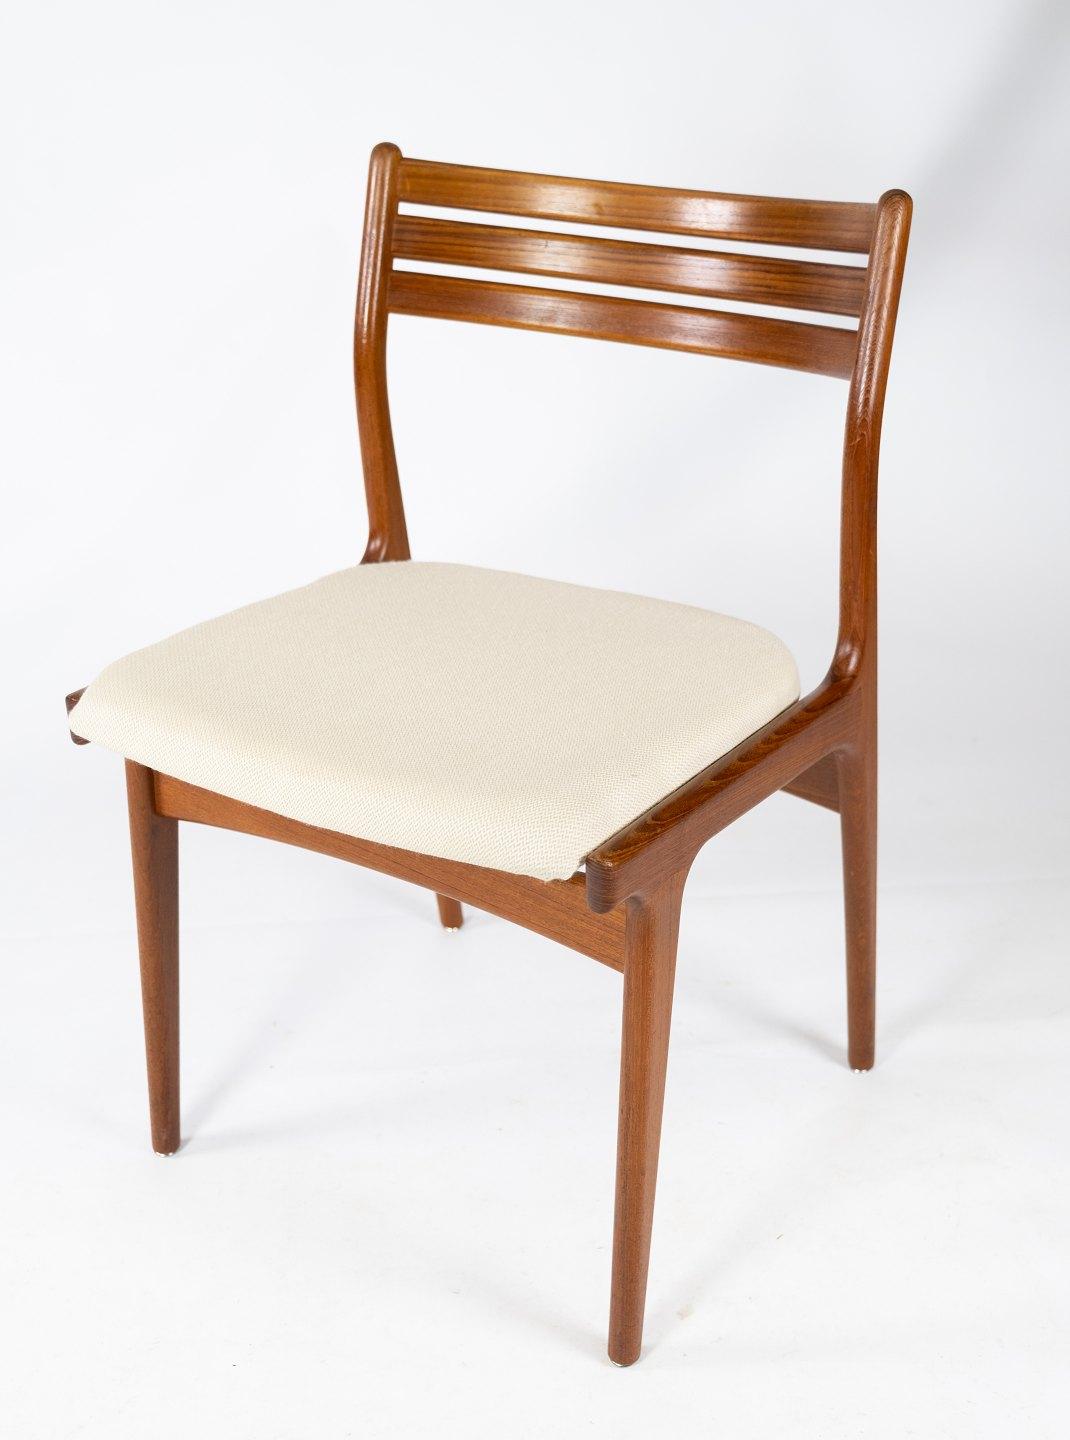 Mid-20th Century Set of Four Dining Room Chairs in Teak of Danish Design, 1960s For Sale